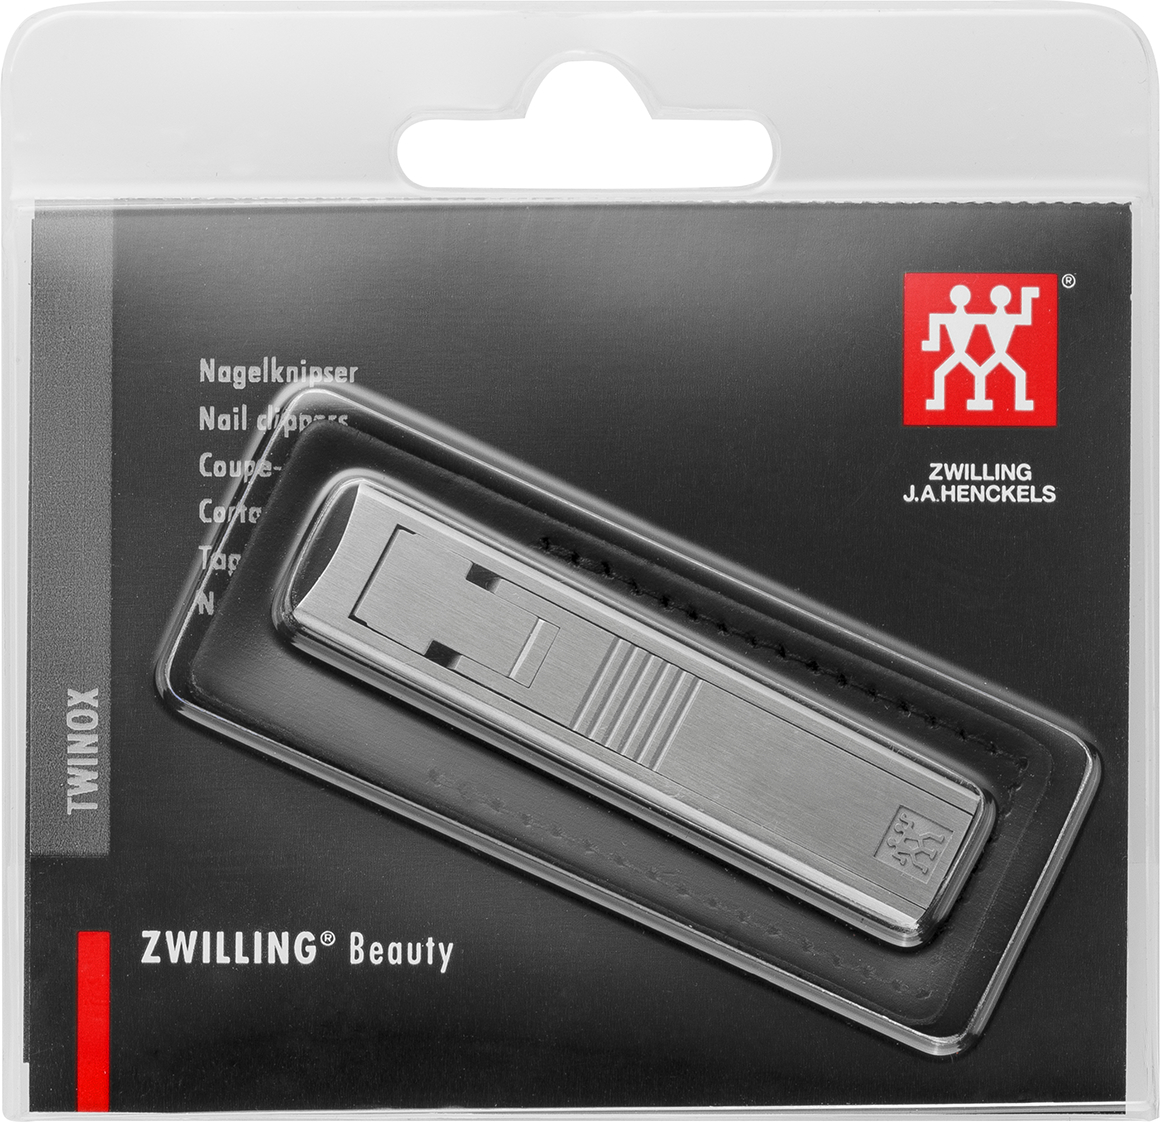 Twin S Nail clipper 6 cm - Zwilling 42440-001-3 | FormAdore